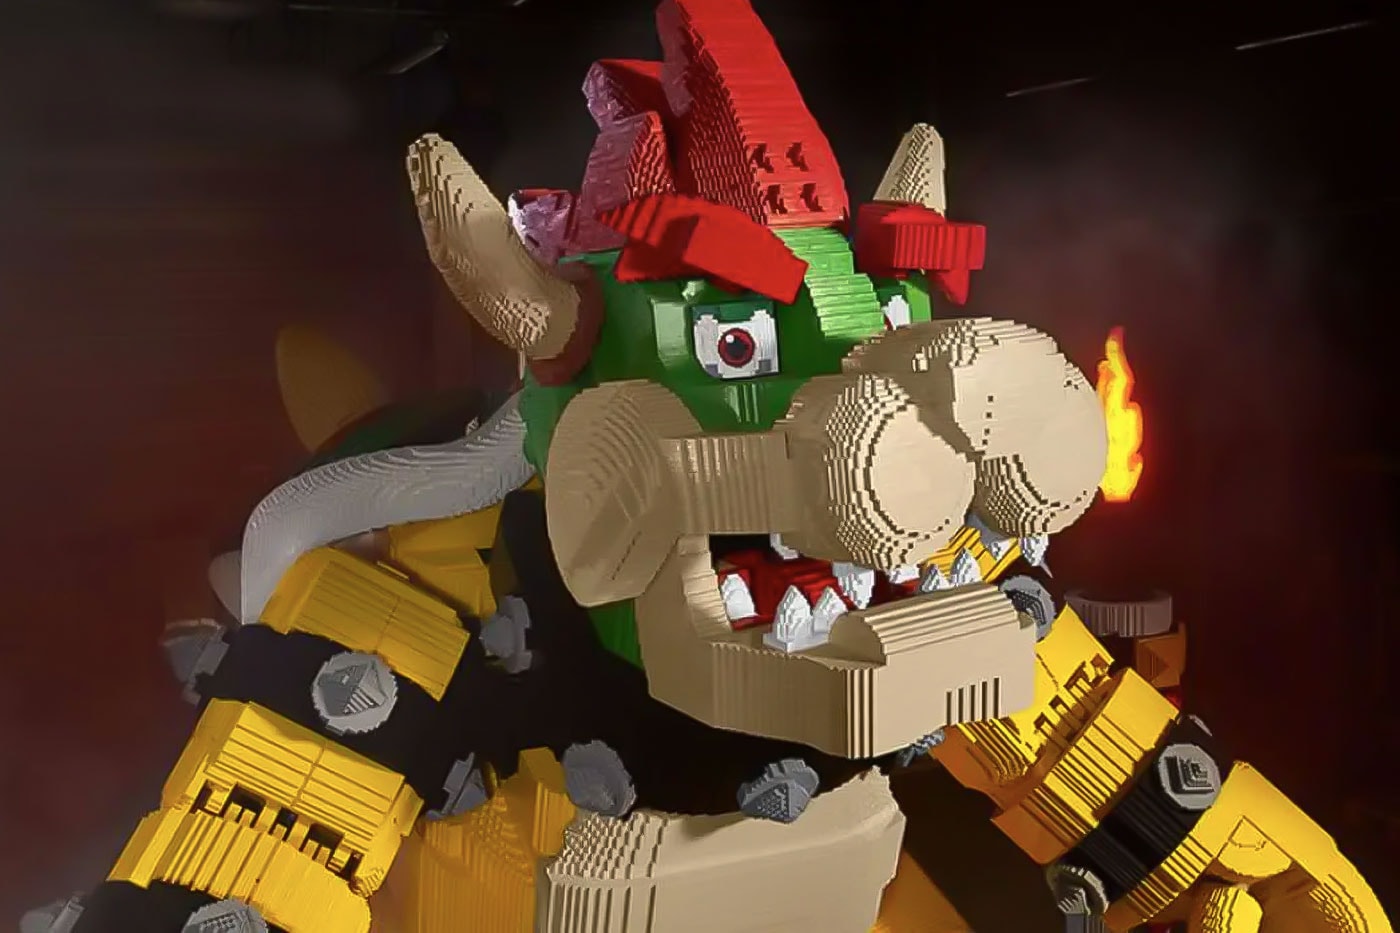 LEGO's Massive Bowser Set Gets Even Bigger The 14 feet tall figure is slated to appear at San Diego Comicon 663900 July 21 24 fiery release info date price